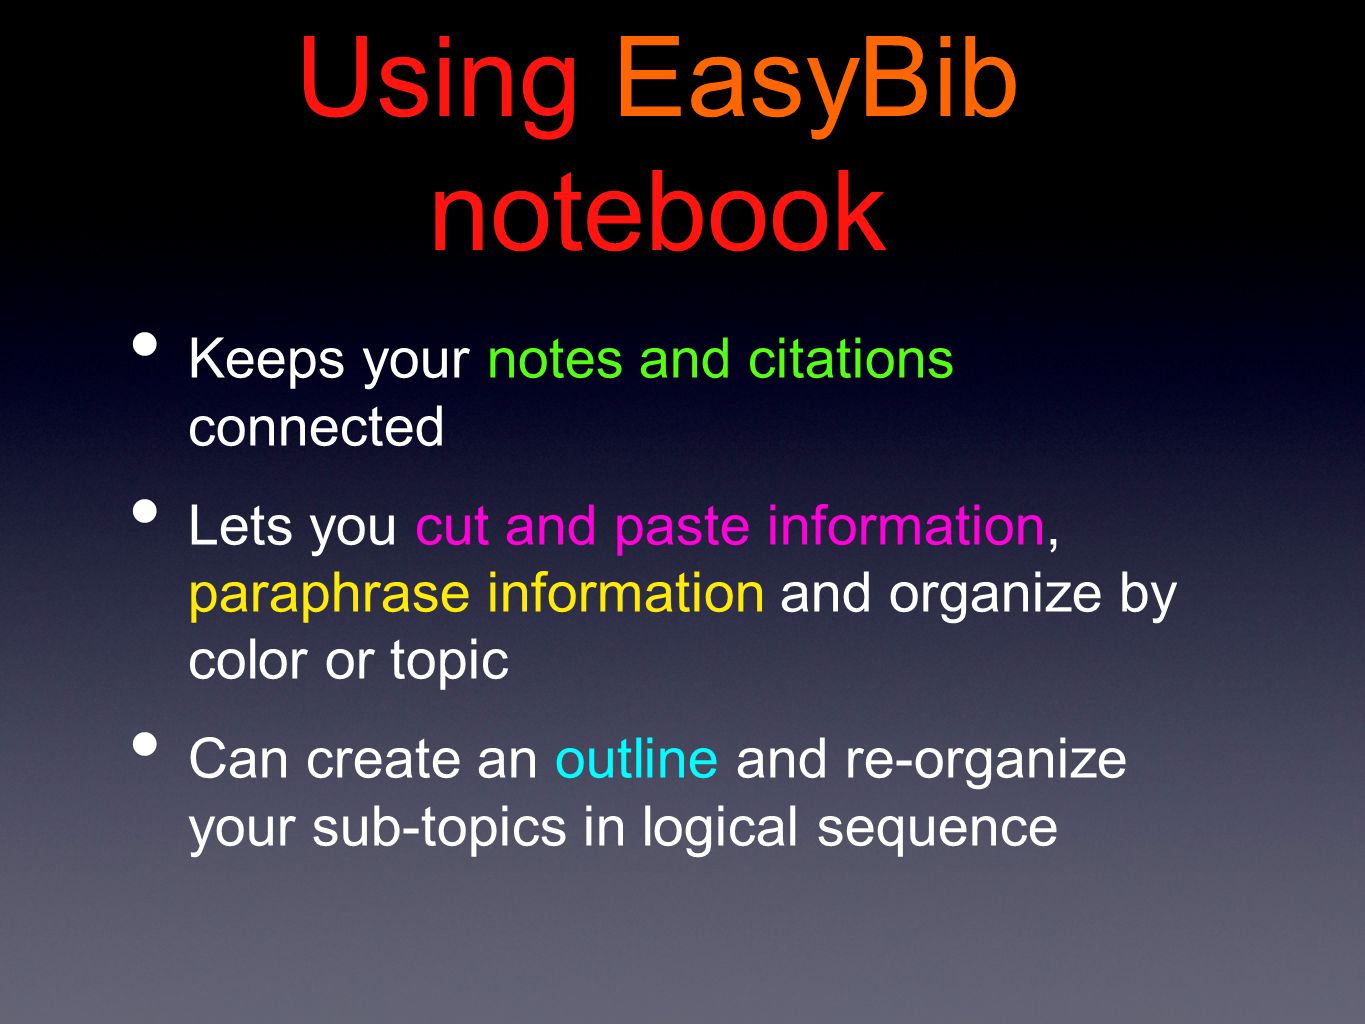 Using EasyBib notebook Keeps your notes and citations connected Lets you cut and paste information, paraphrase information and organize by color or topic Can create an outline and re-organize your sub-topics in logical sequence